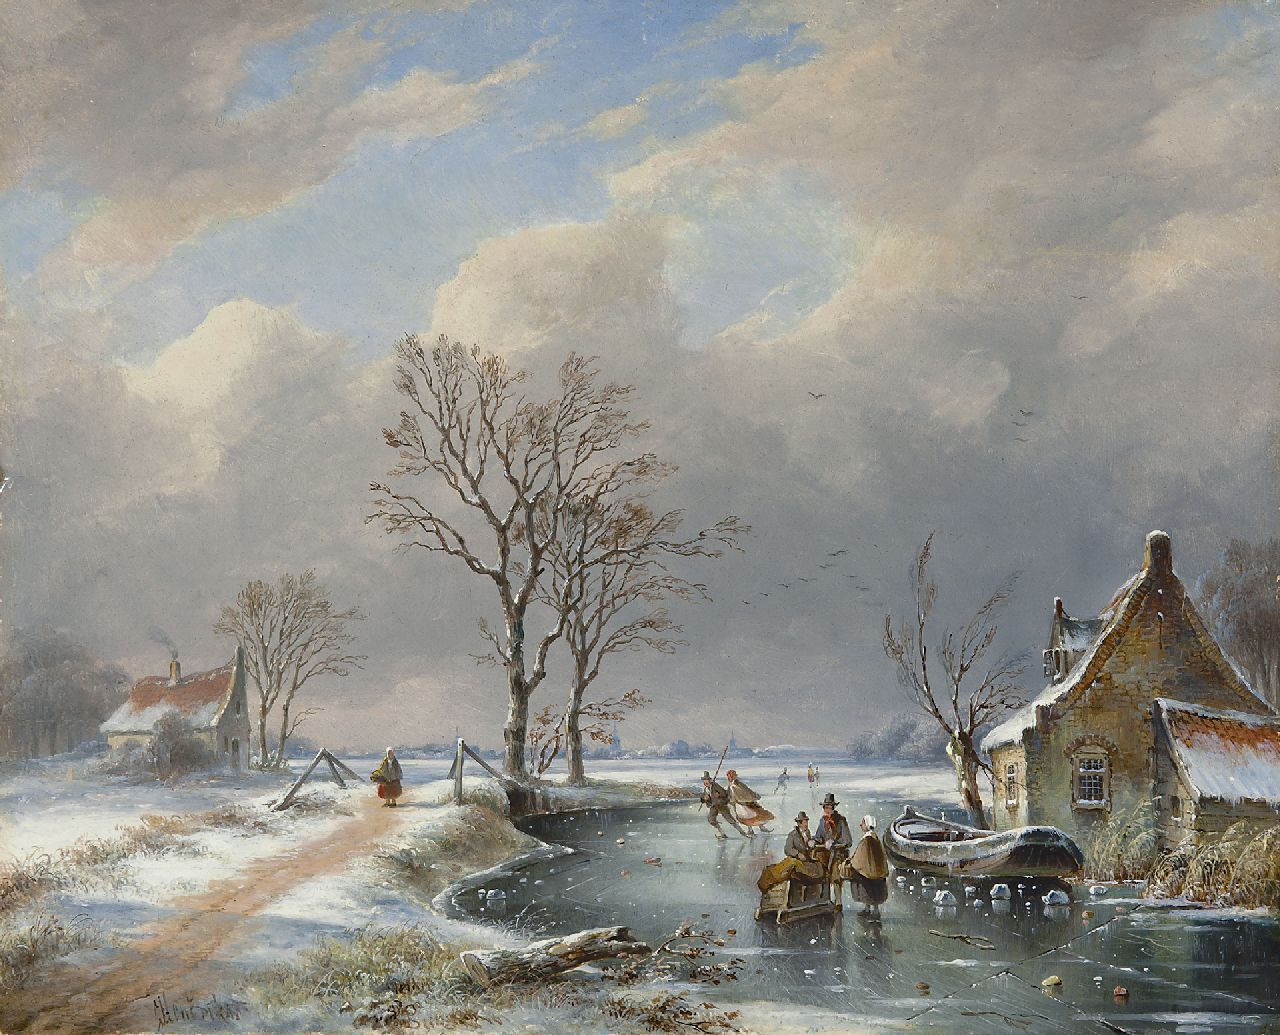 Hendriks G.  | Gerardus 'George Henry' Hendriks, A winter landscape with skaters and a sledge, oil on panel 29.2 x 36.3 cm, signed l.l.